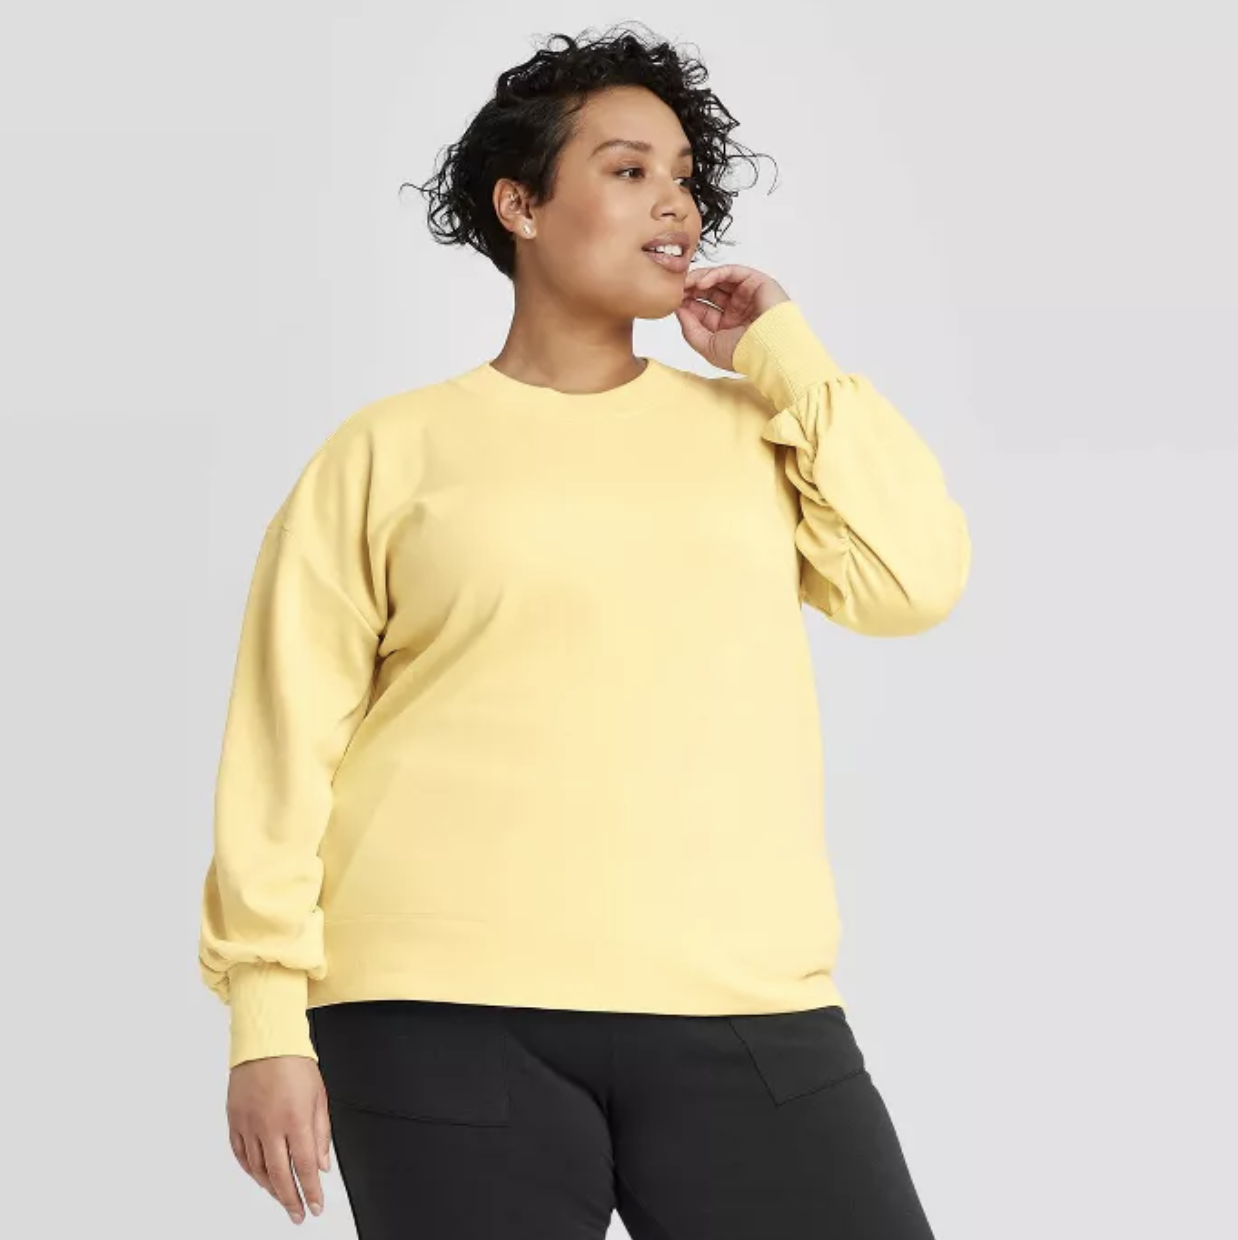 Target's Having A Flash Sale On Activewear So Now's The Time To Stock ...